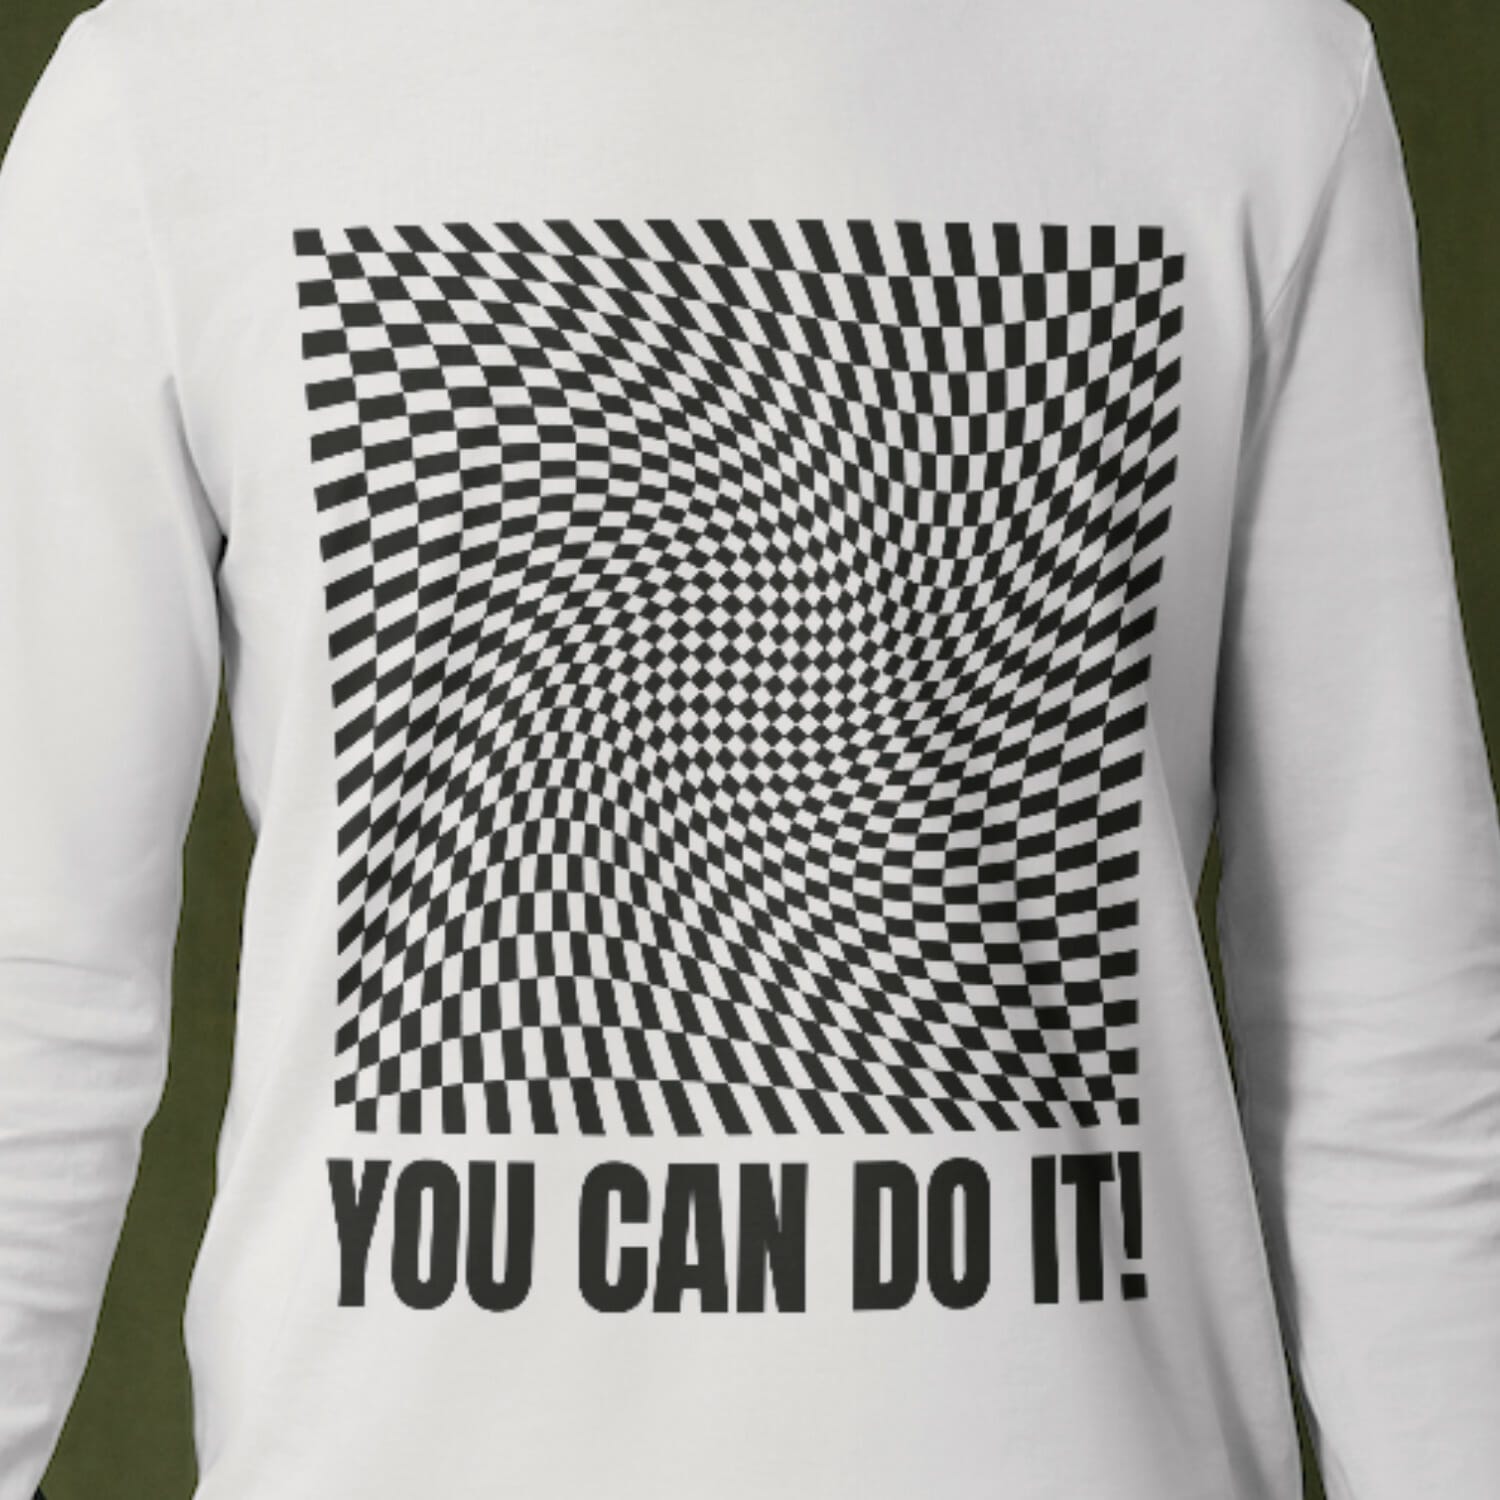 You can do it - Abstract T shirt design